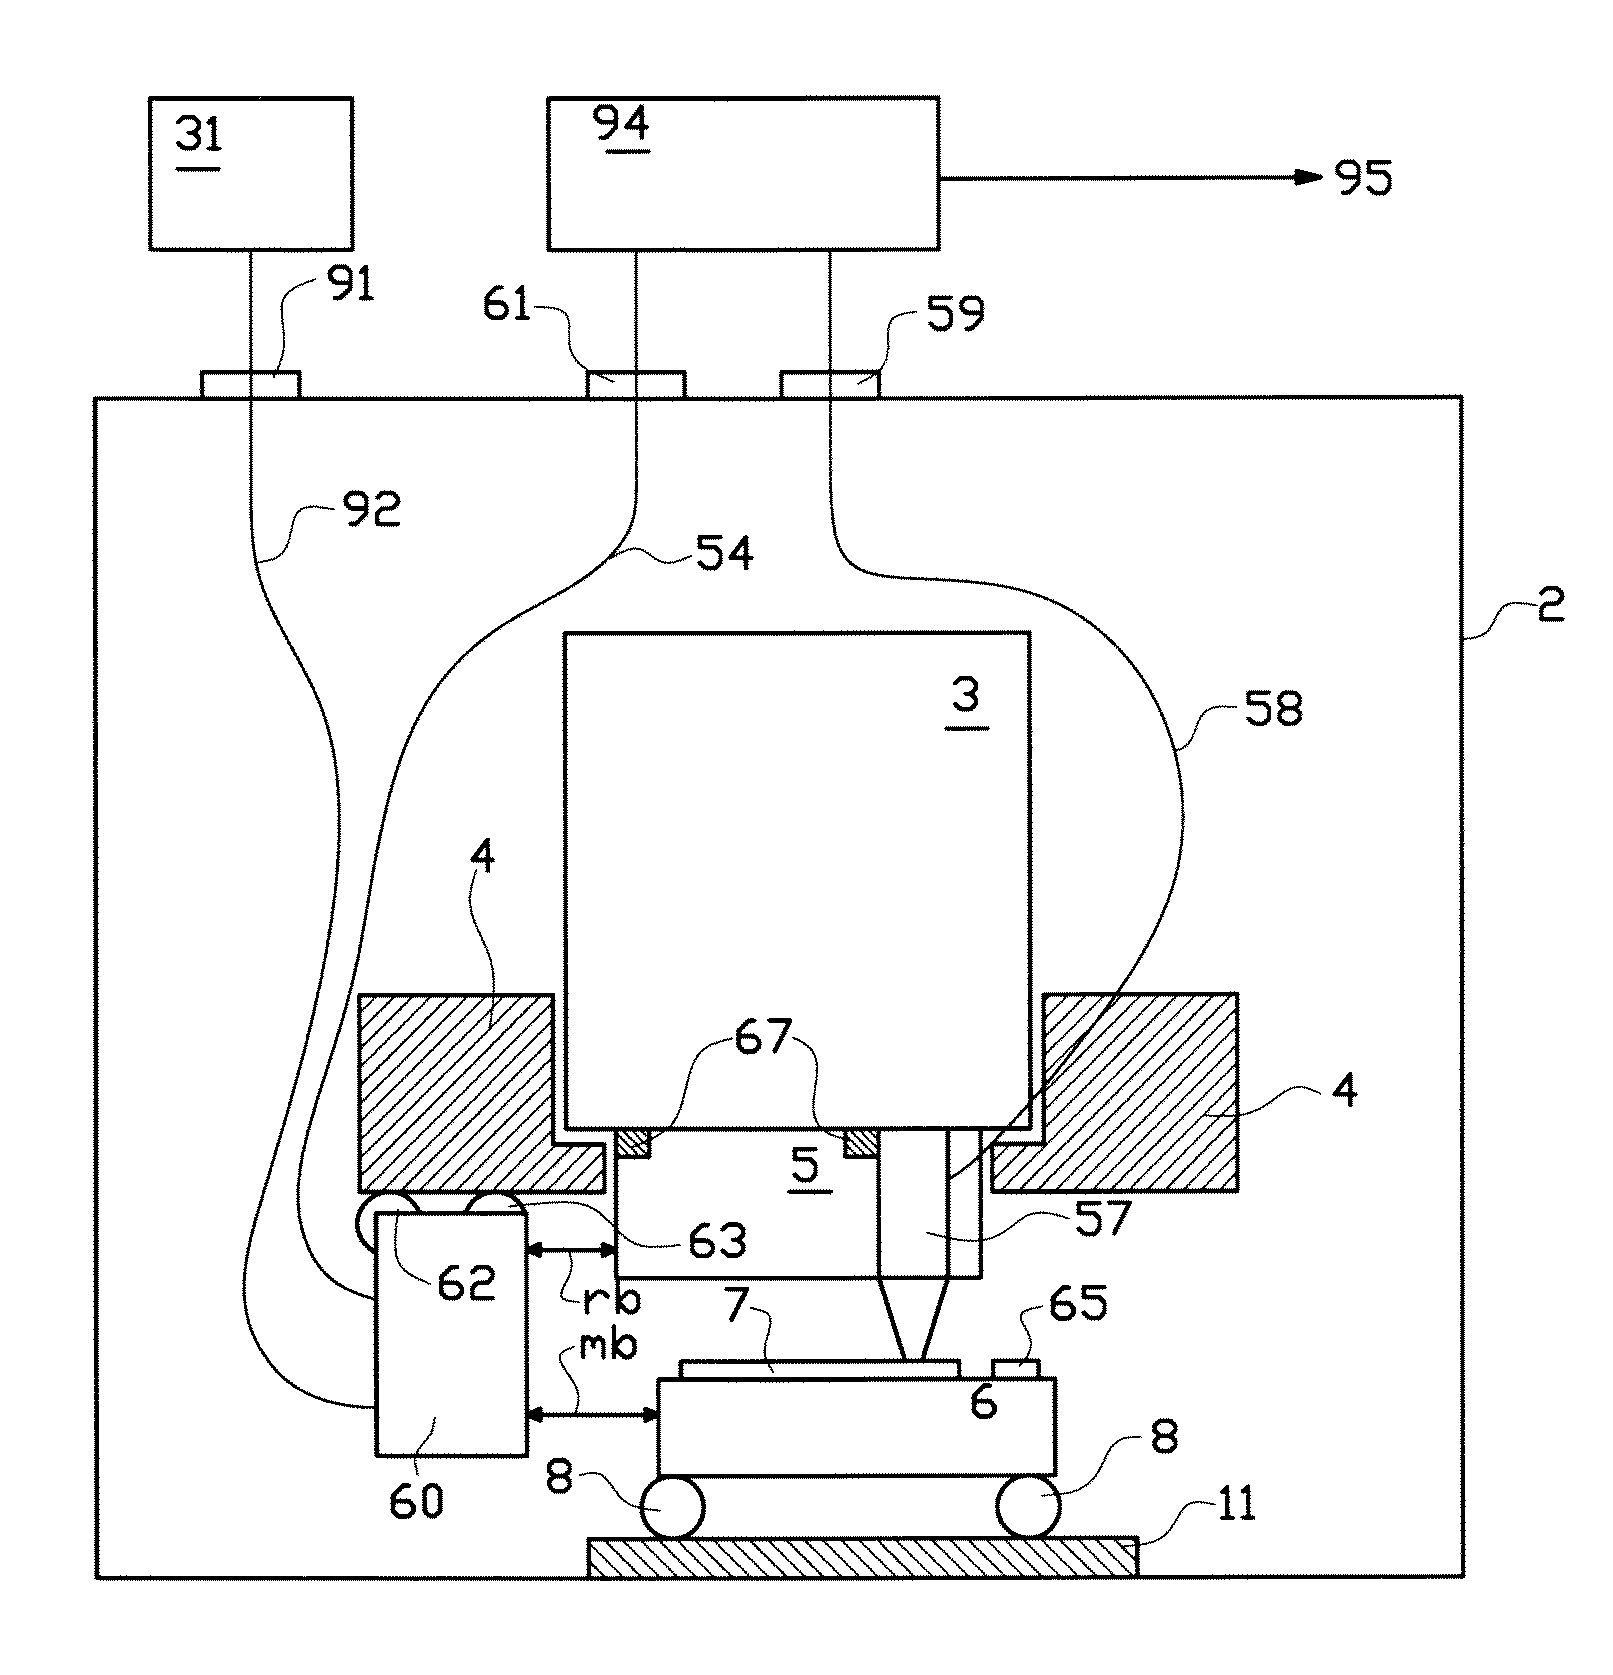 Lithography system with differential interferometer module